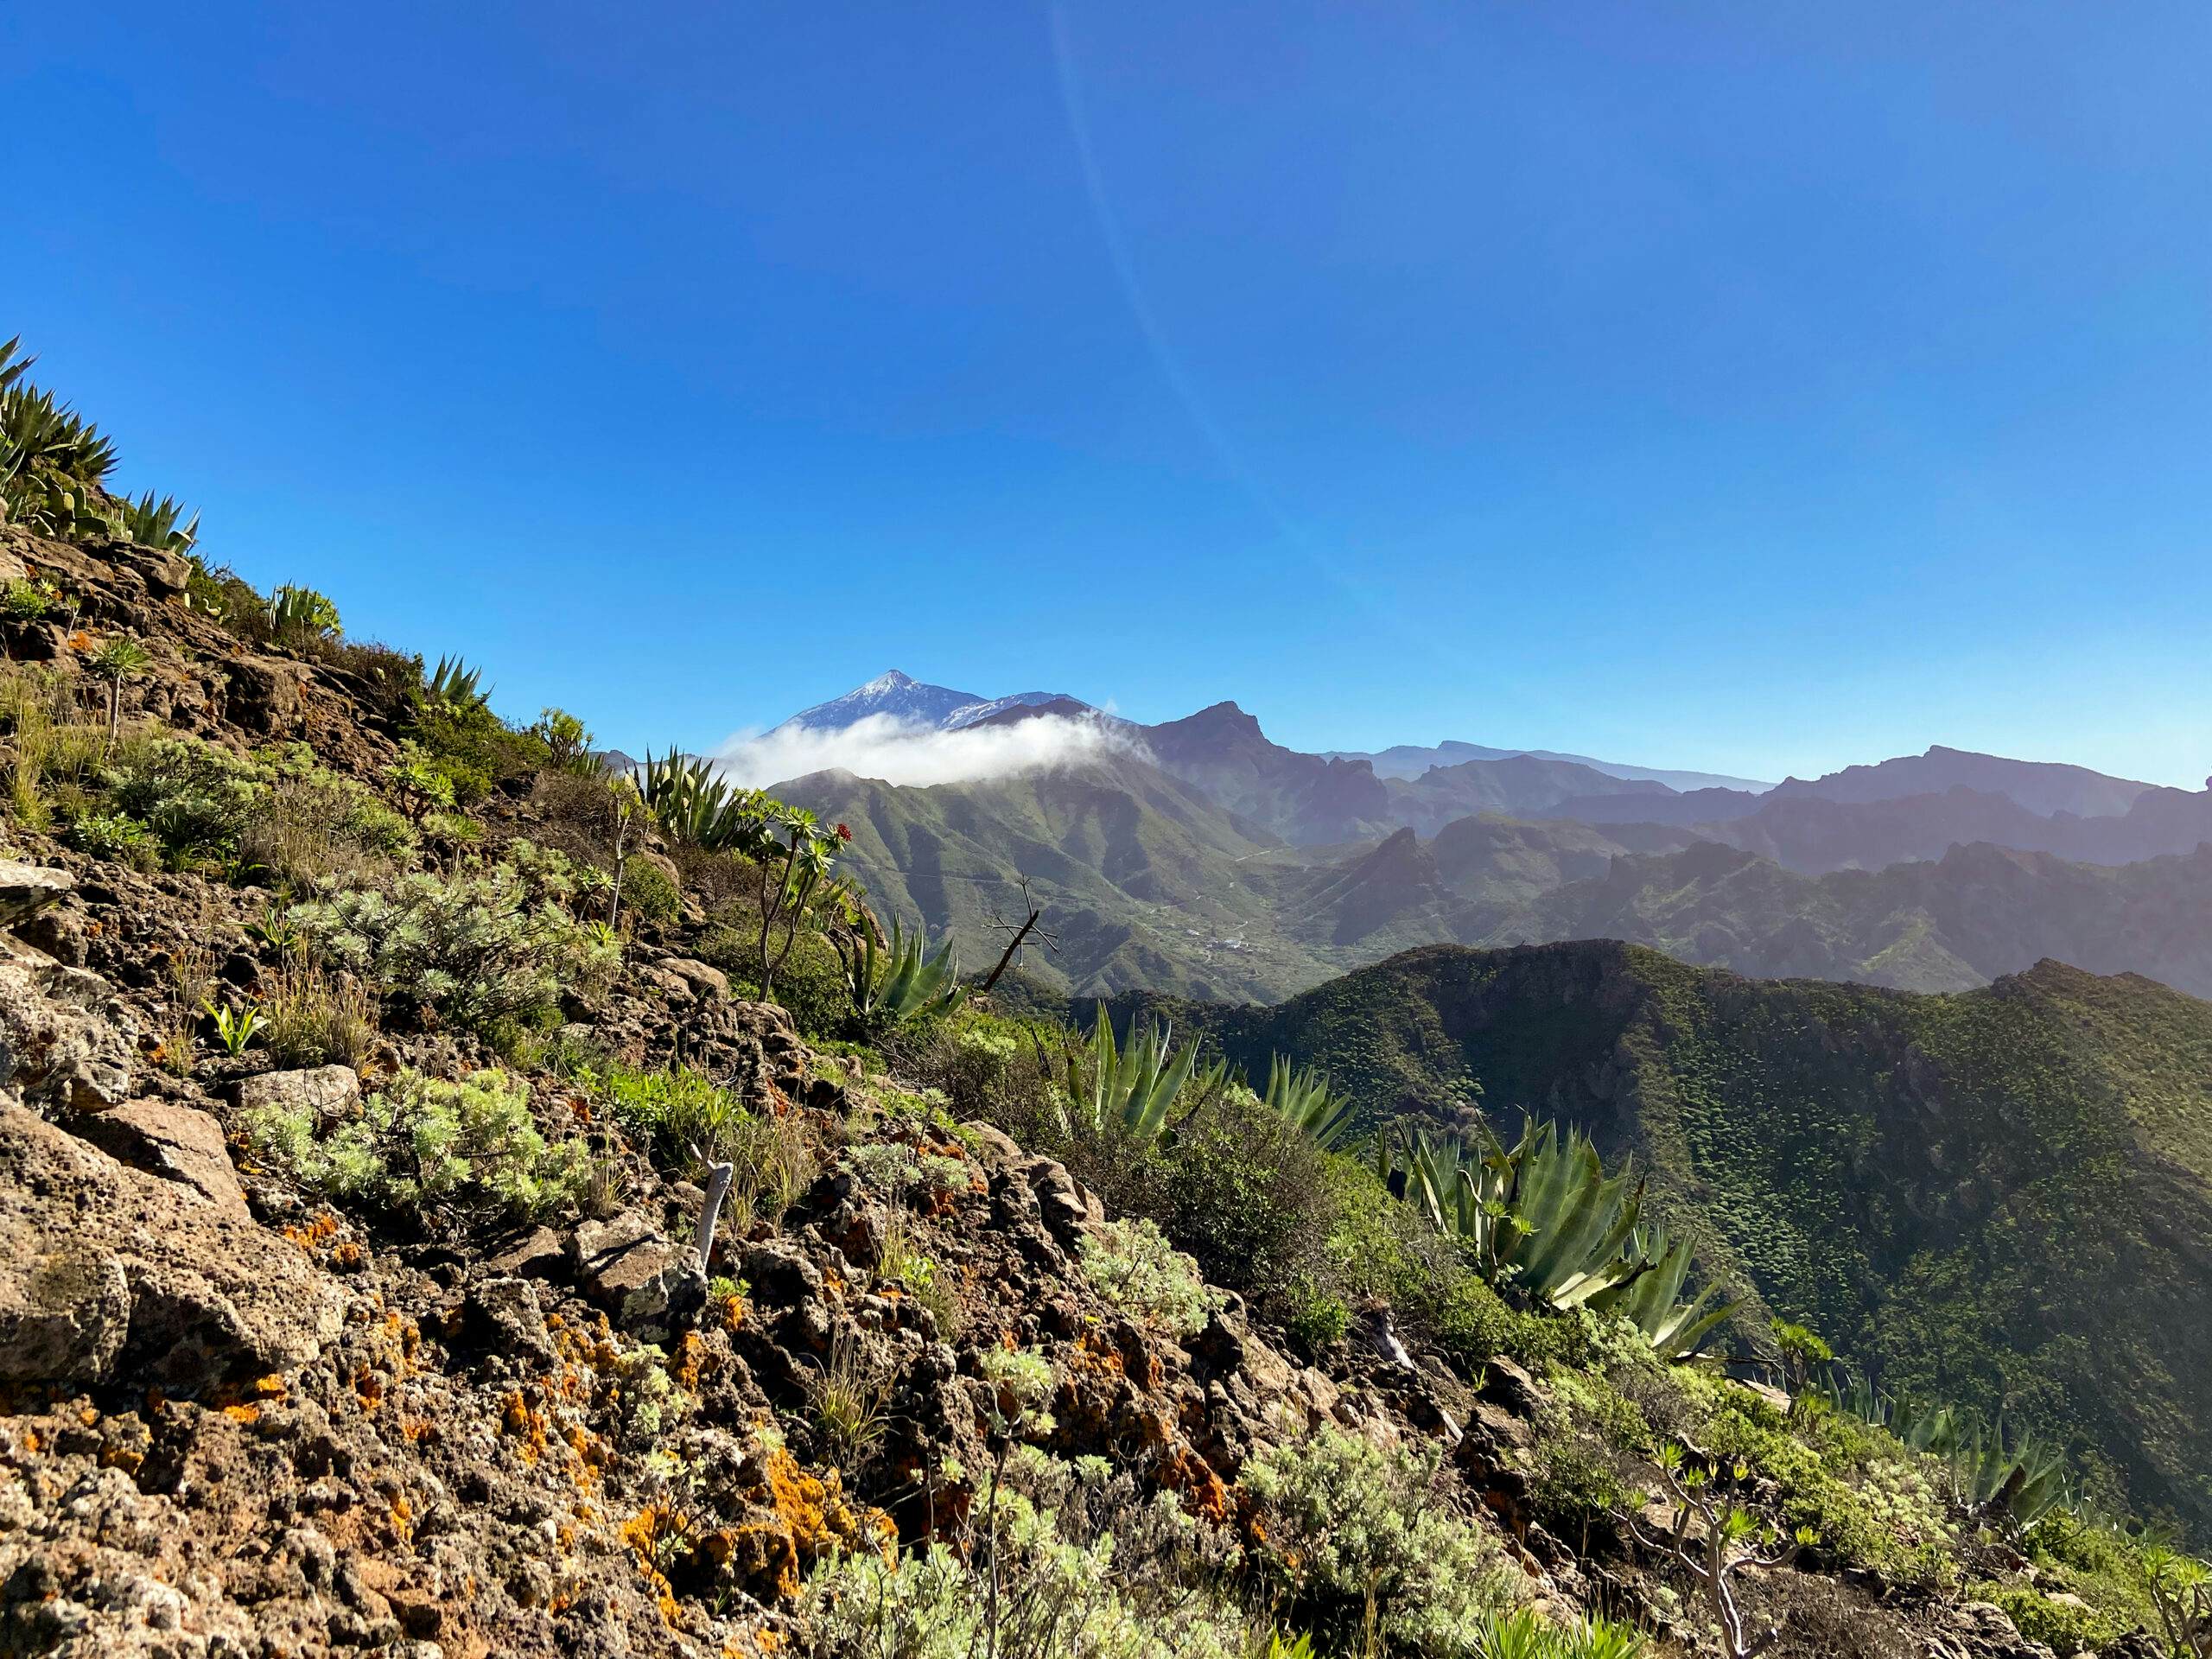 View of the Teide